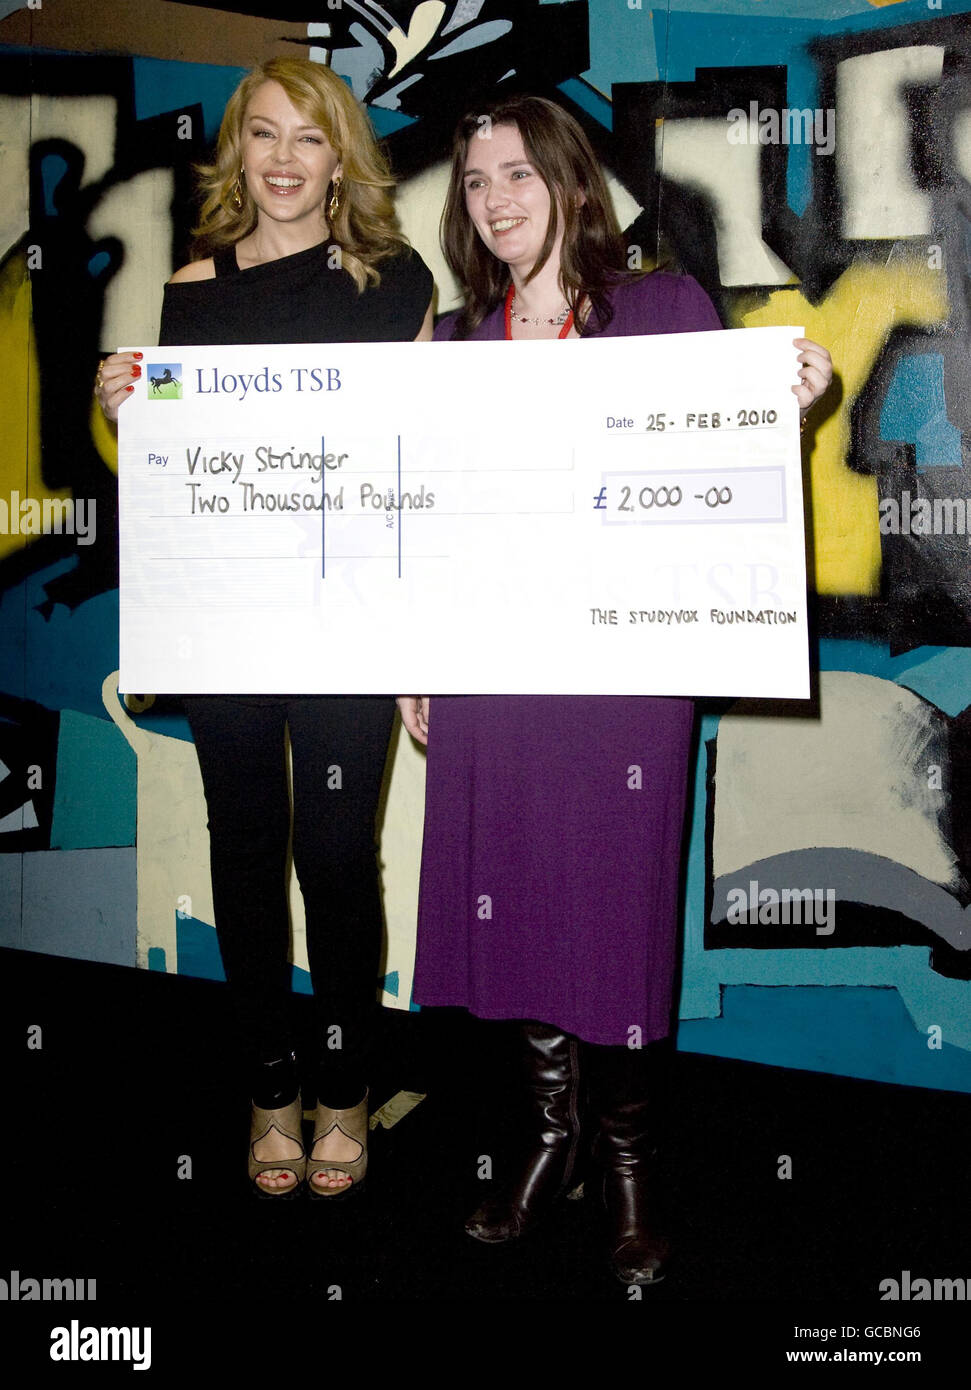 Kylie presents student bursaries - Oxford. Kylie Minogue presents an award to Studyvox FM student Vicky Stringer at The Old Estate Yard, Oxfordshire. Stock Photo